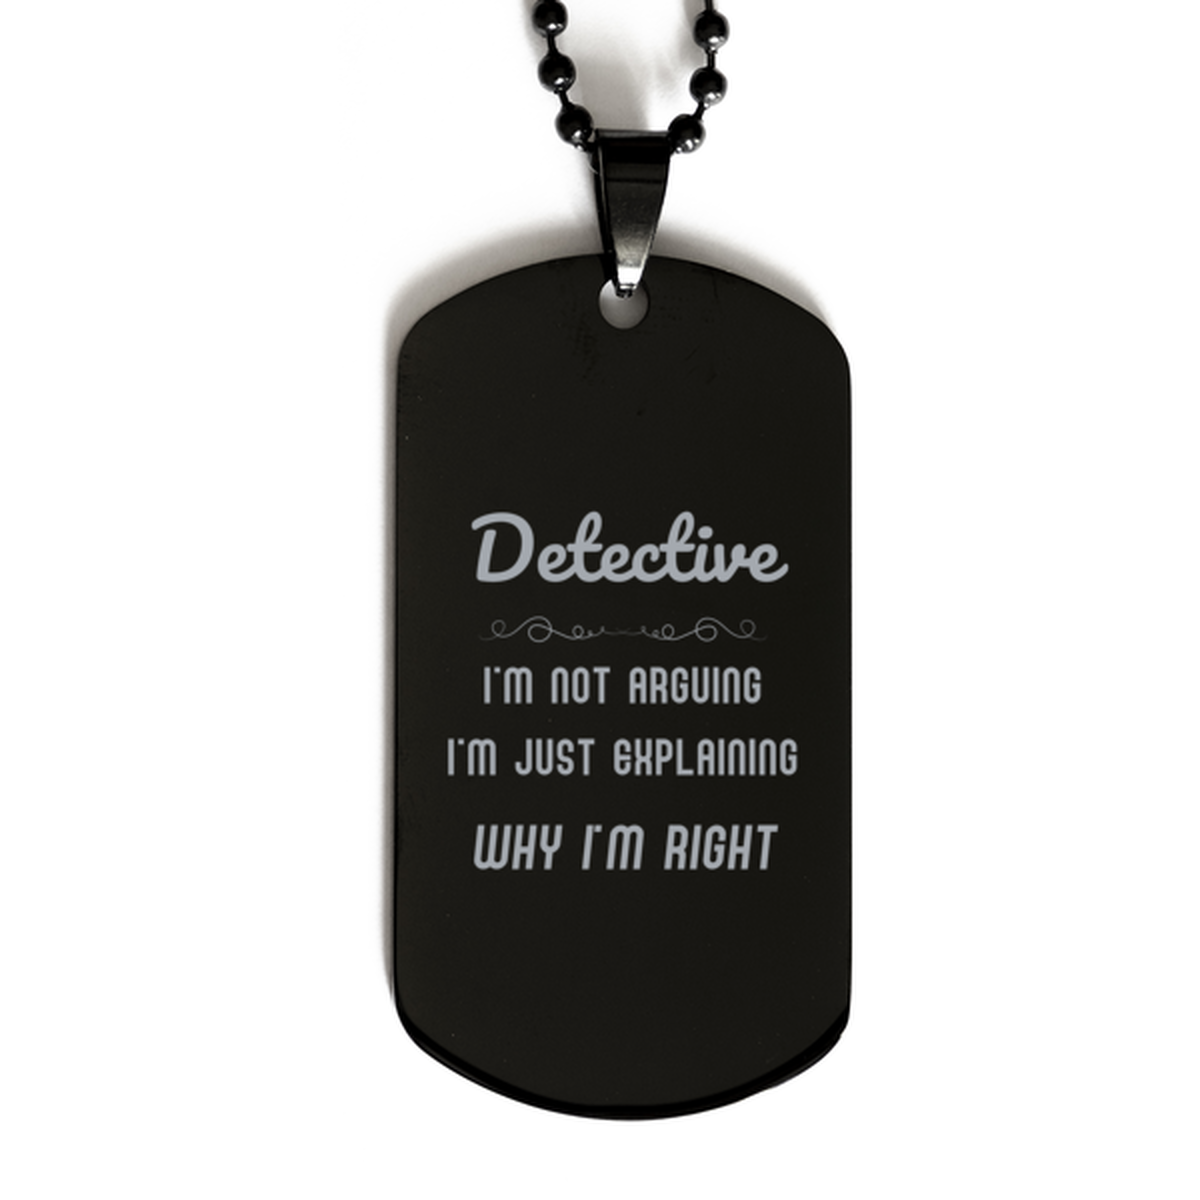 Detective I'm not Arguing. I'm Just Explaining Why I'm RIGHT Black Dog Tag, Funny Saying Quote Detective Gifts For Detective Graduation Birthday Christmas Gifts for Men Women Coworker